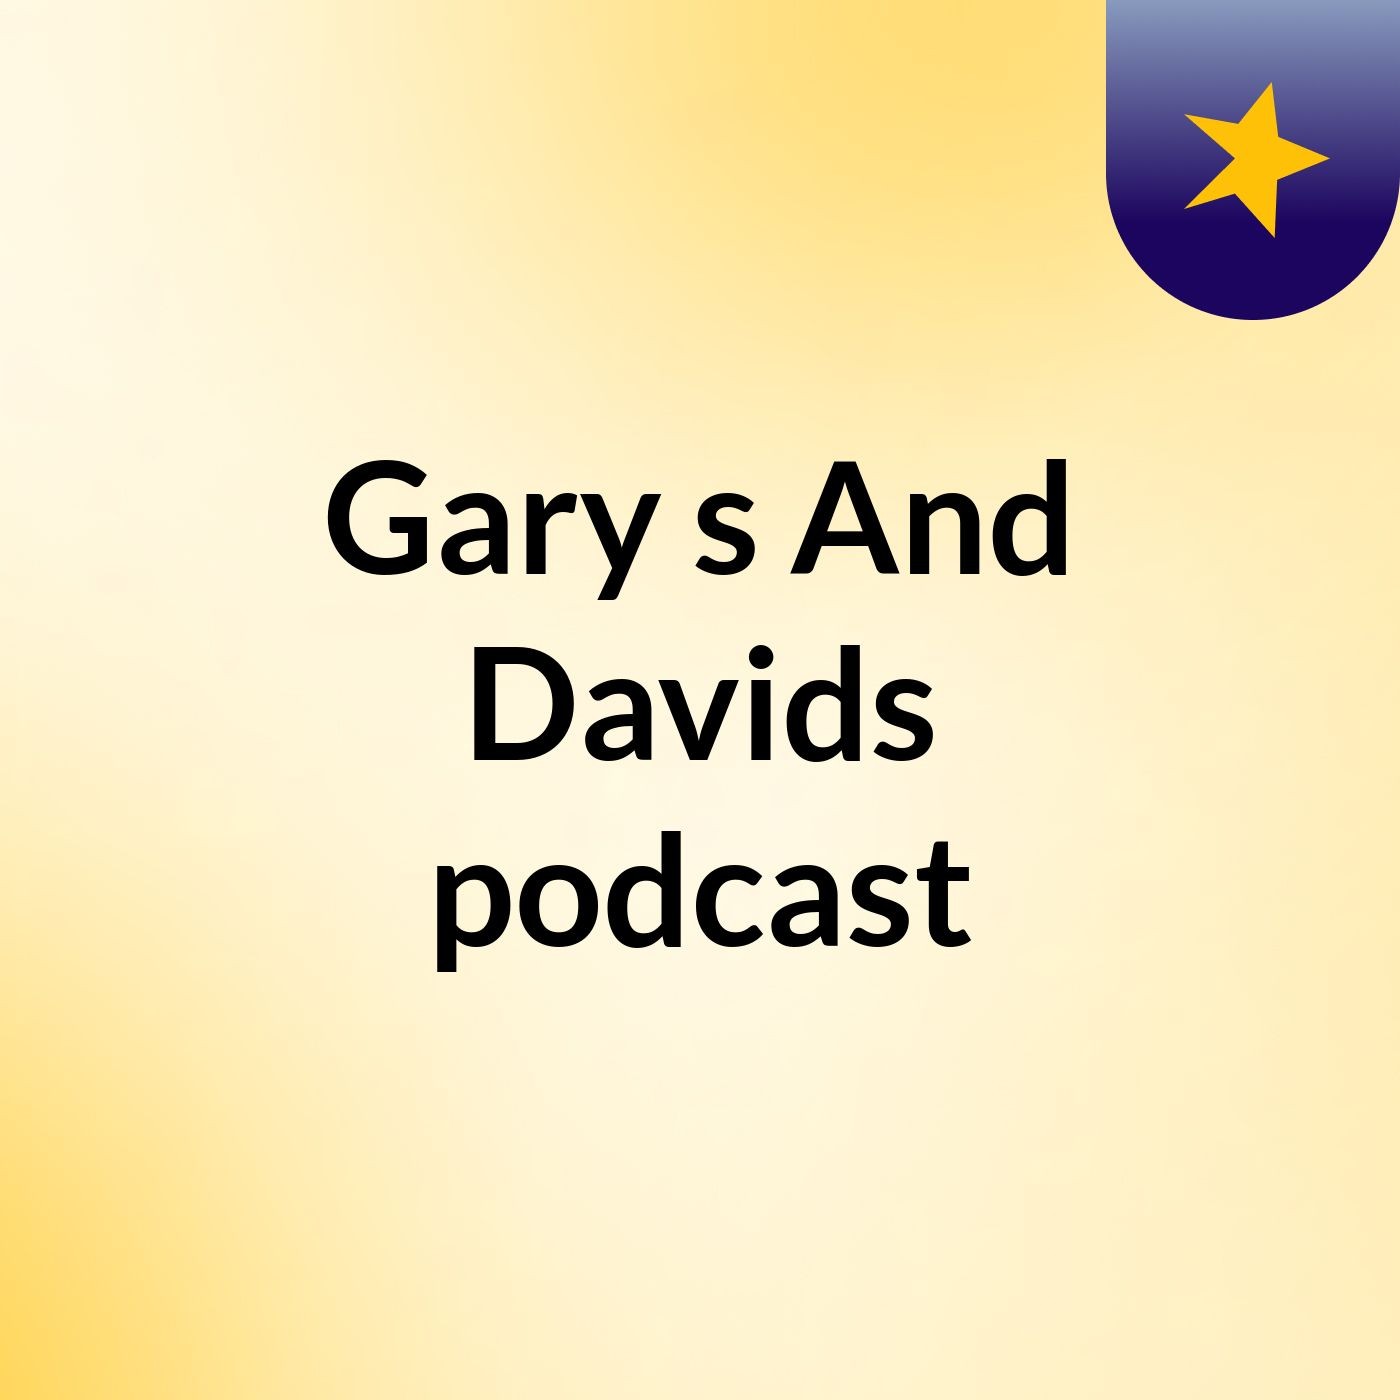 Episode 1 - Gary's And Davids podcast